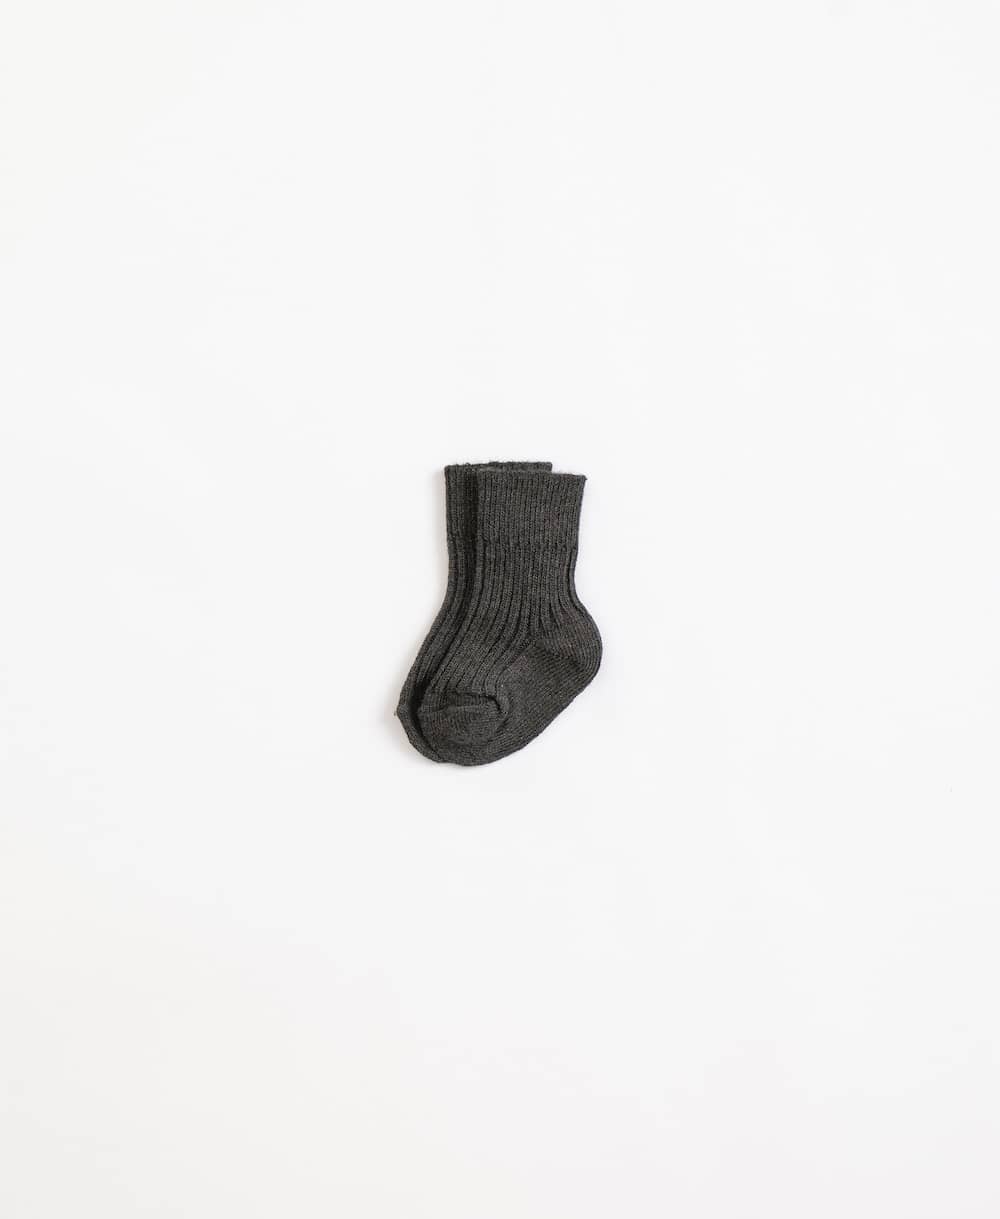 Chaussettes Anthracite - PLAY UP -liliandjude